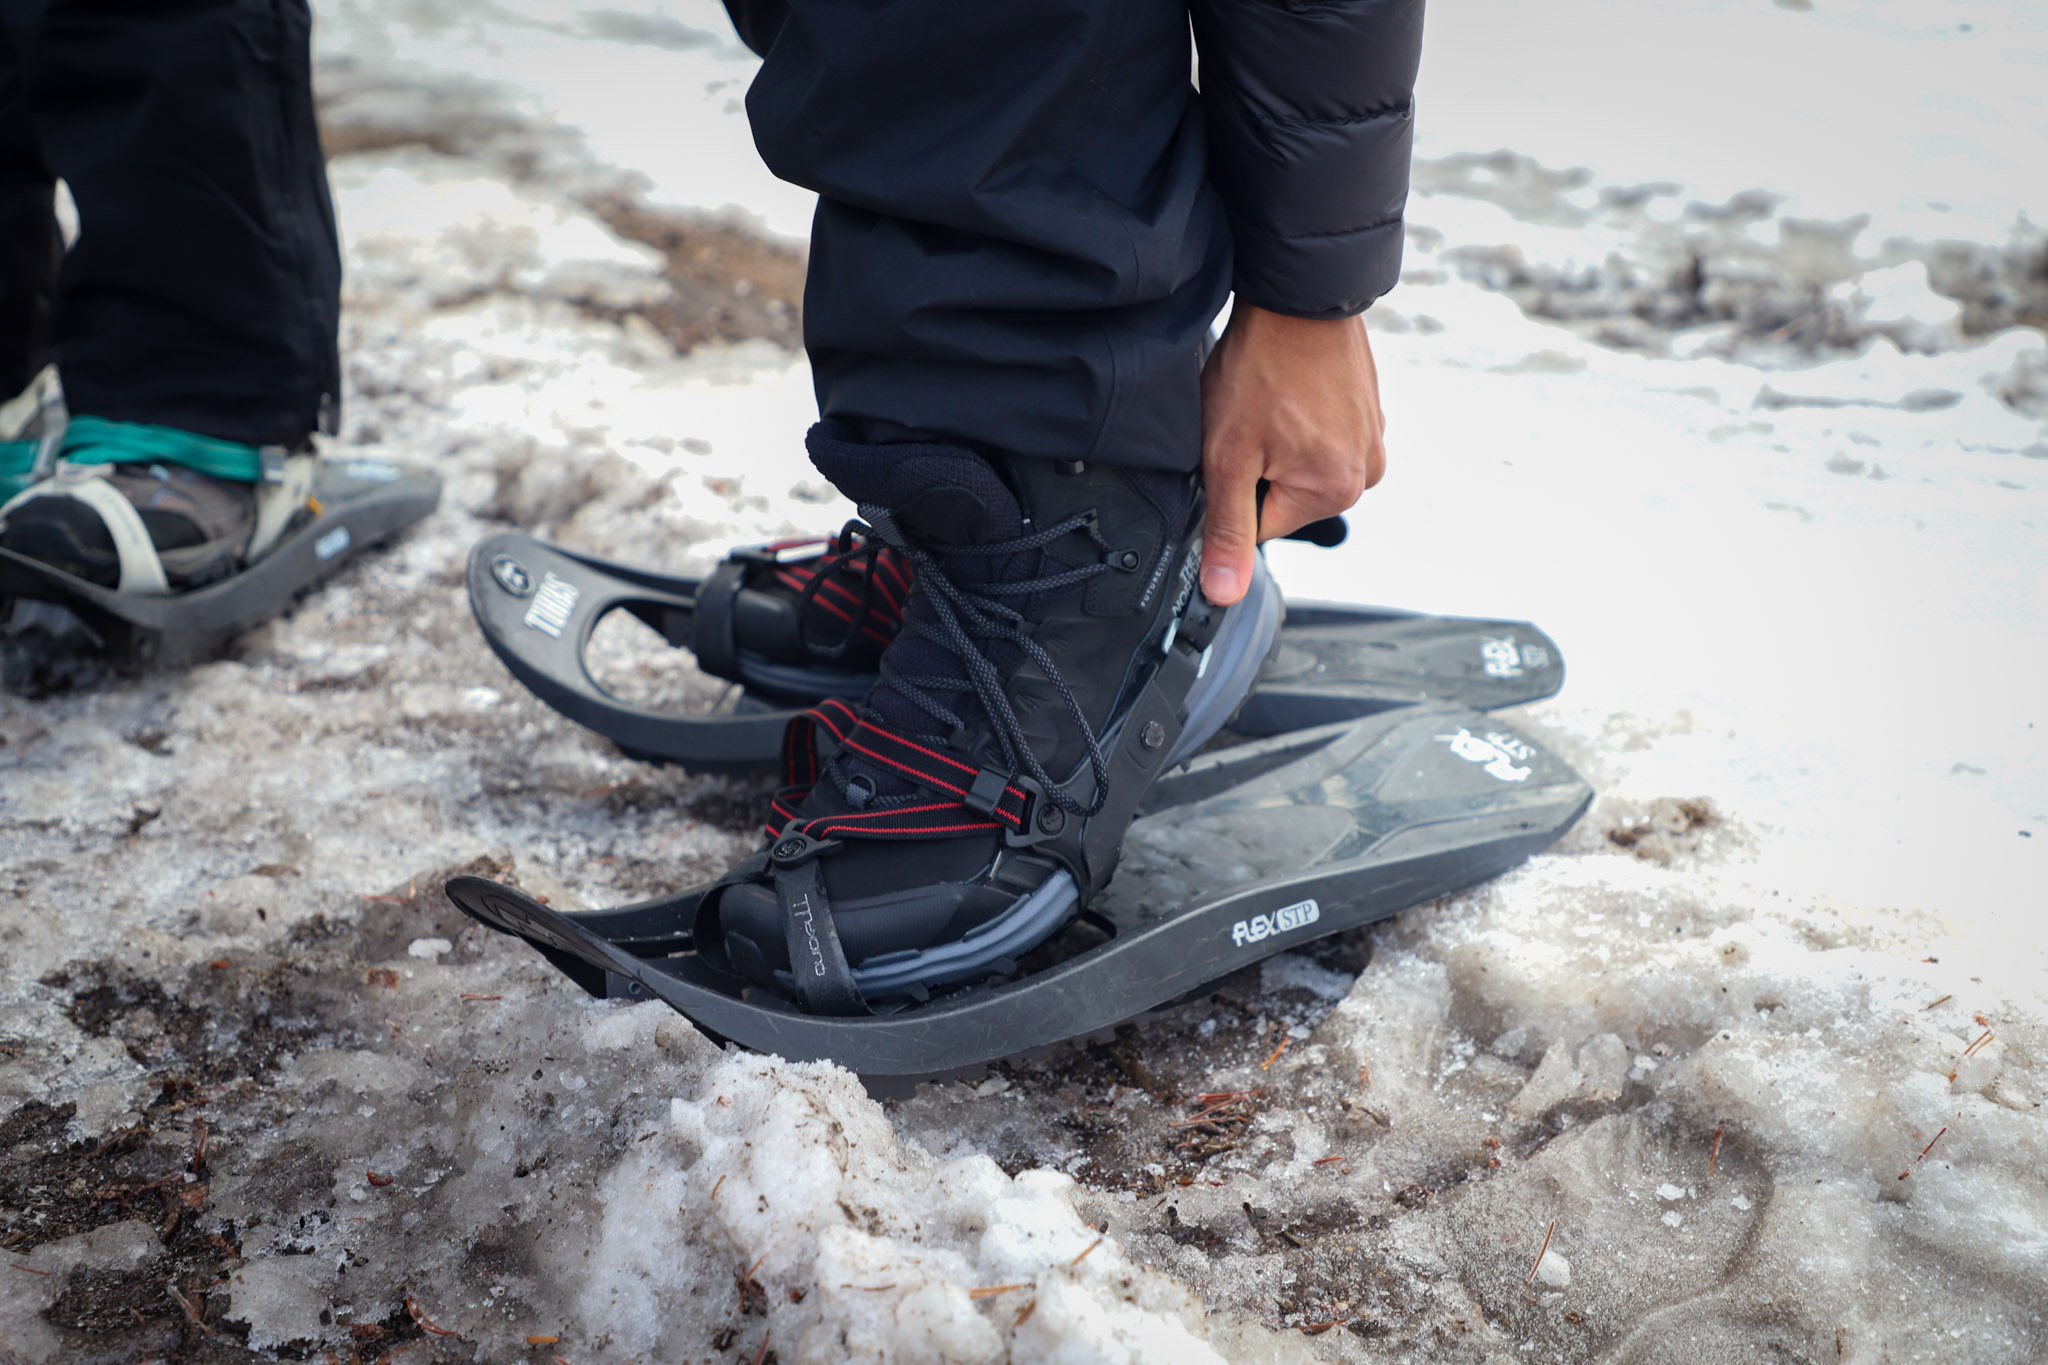 A person is adjusting snowshoes on their feet over patchy snow.